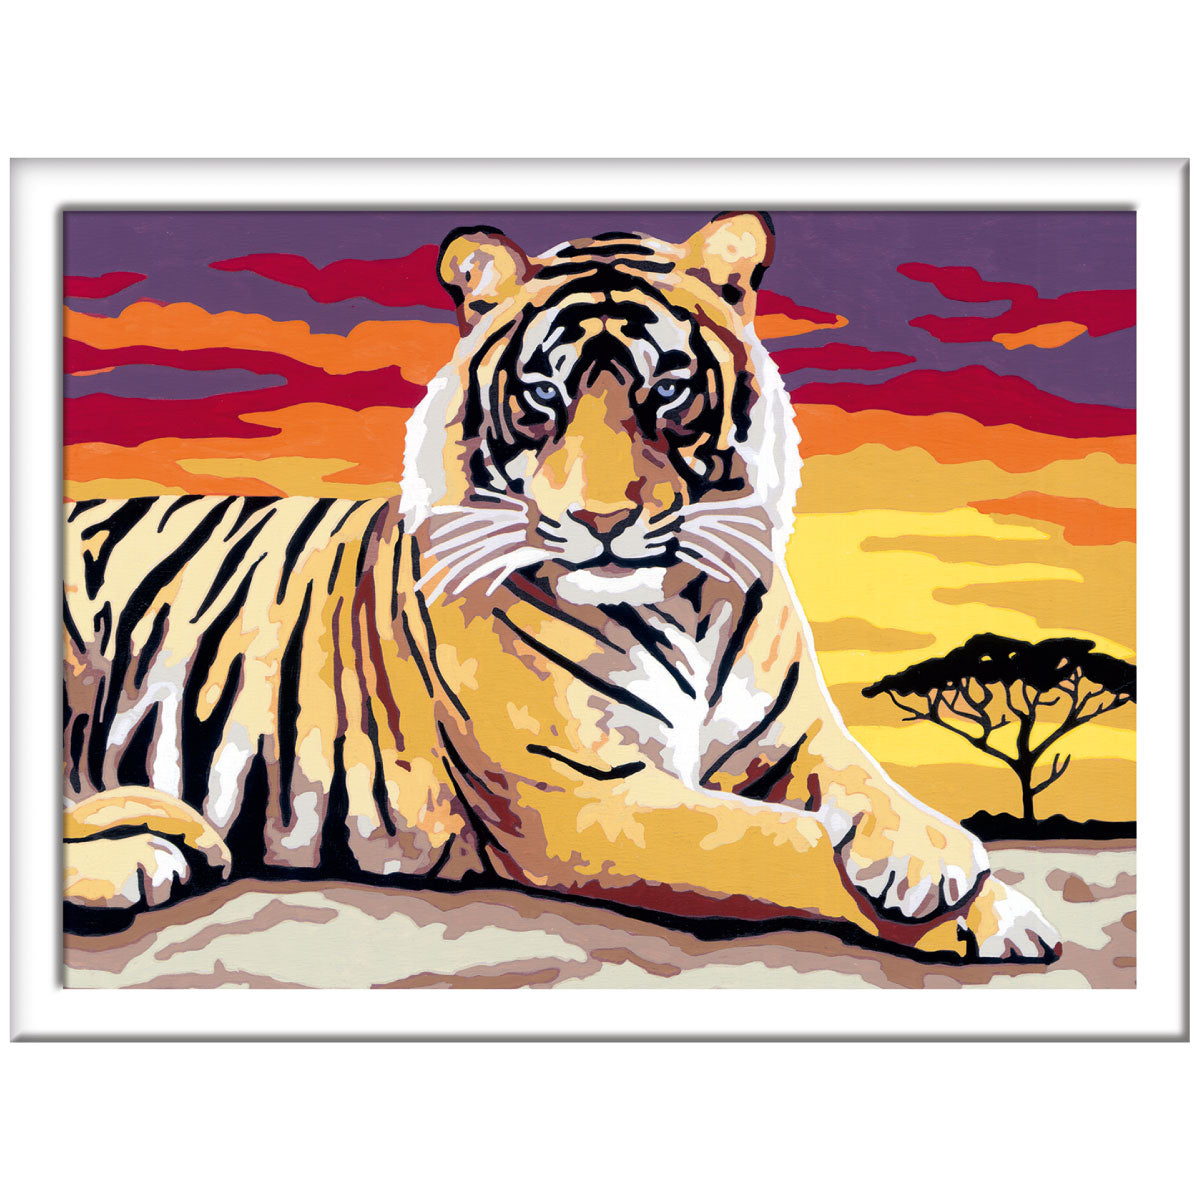 Ravensburger CreArt Paint By Number Majestic Tiger